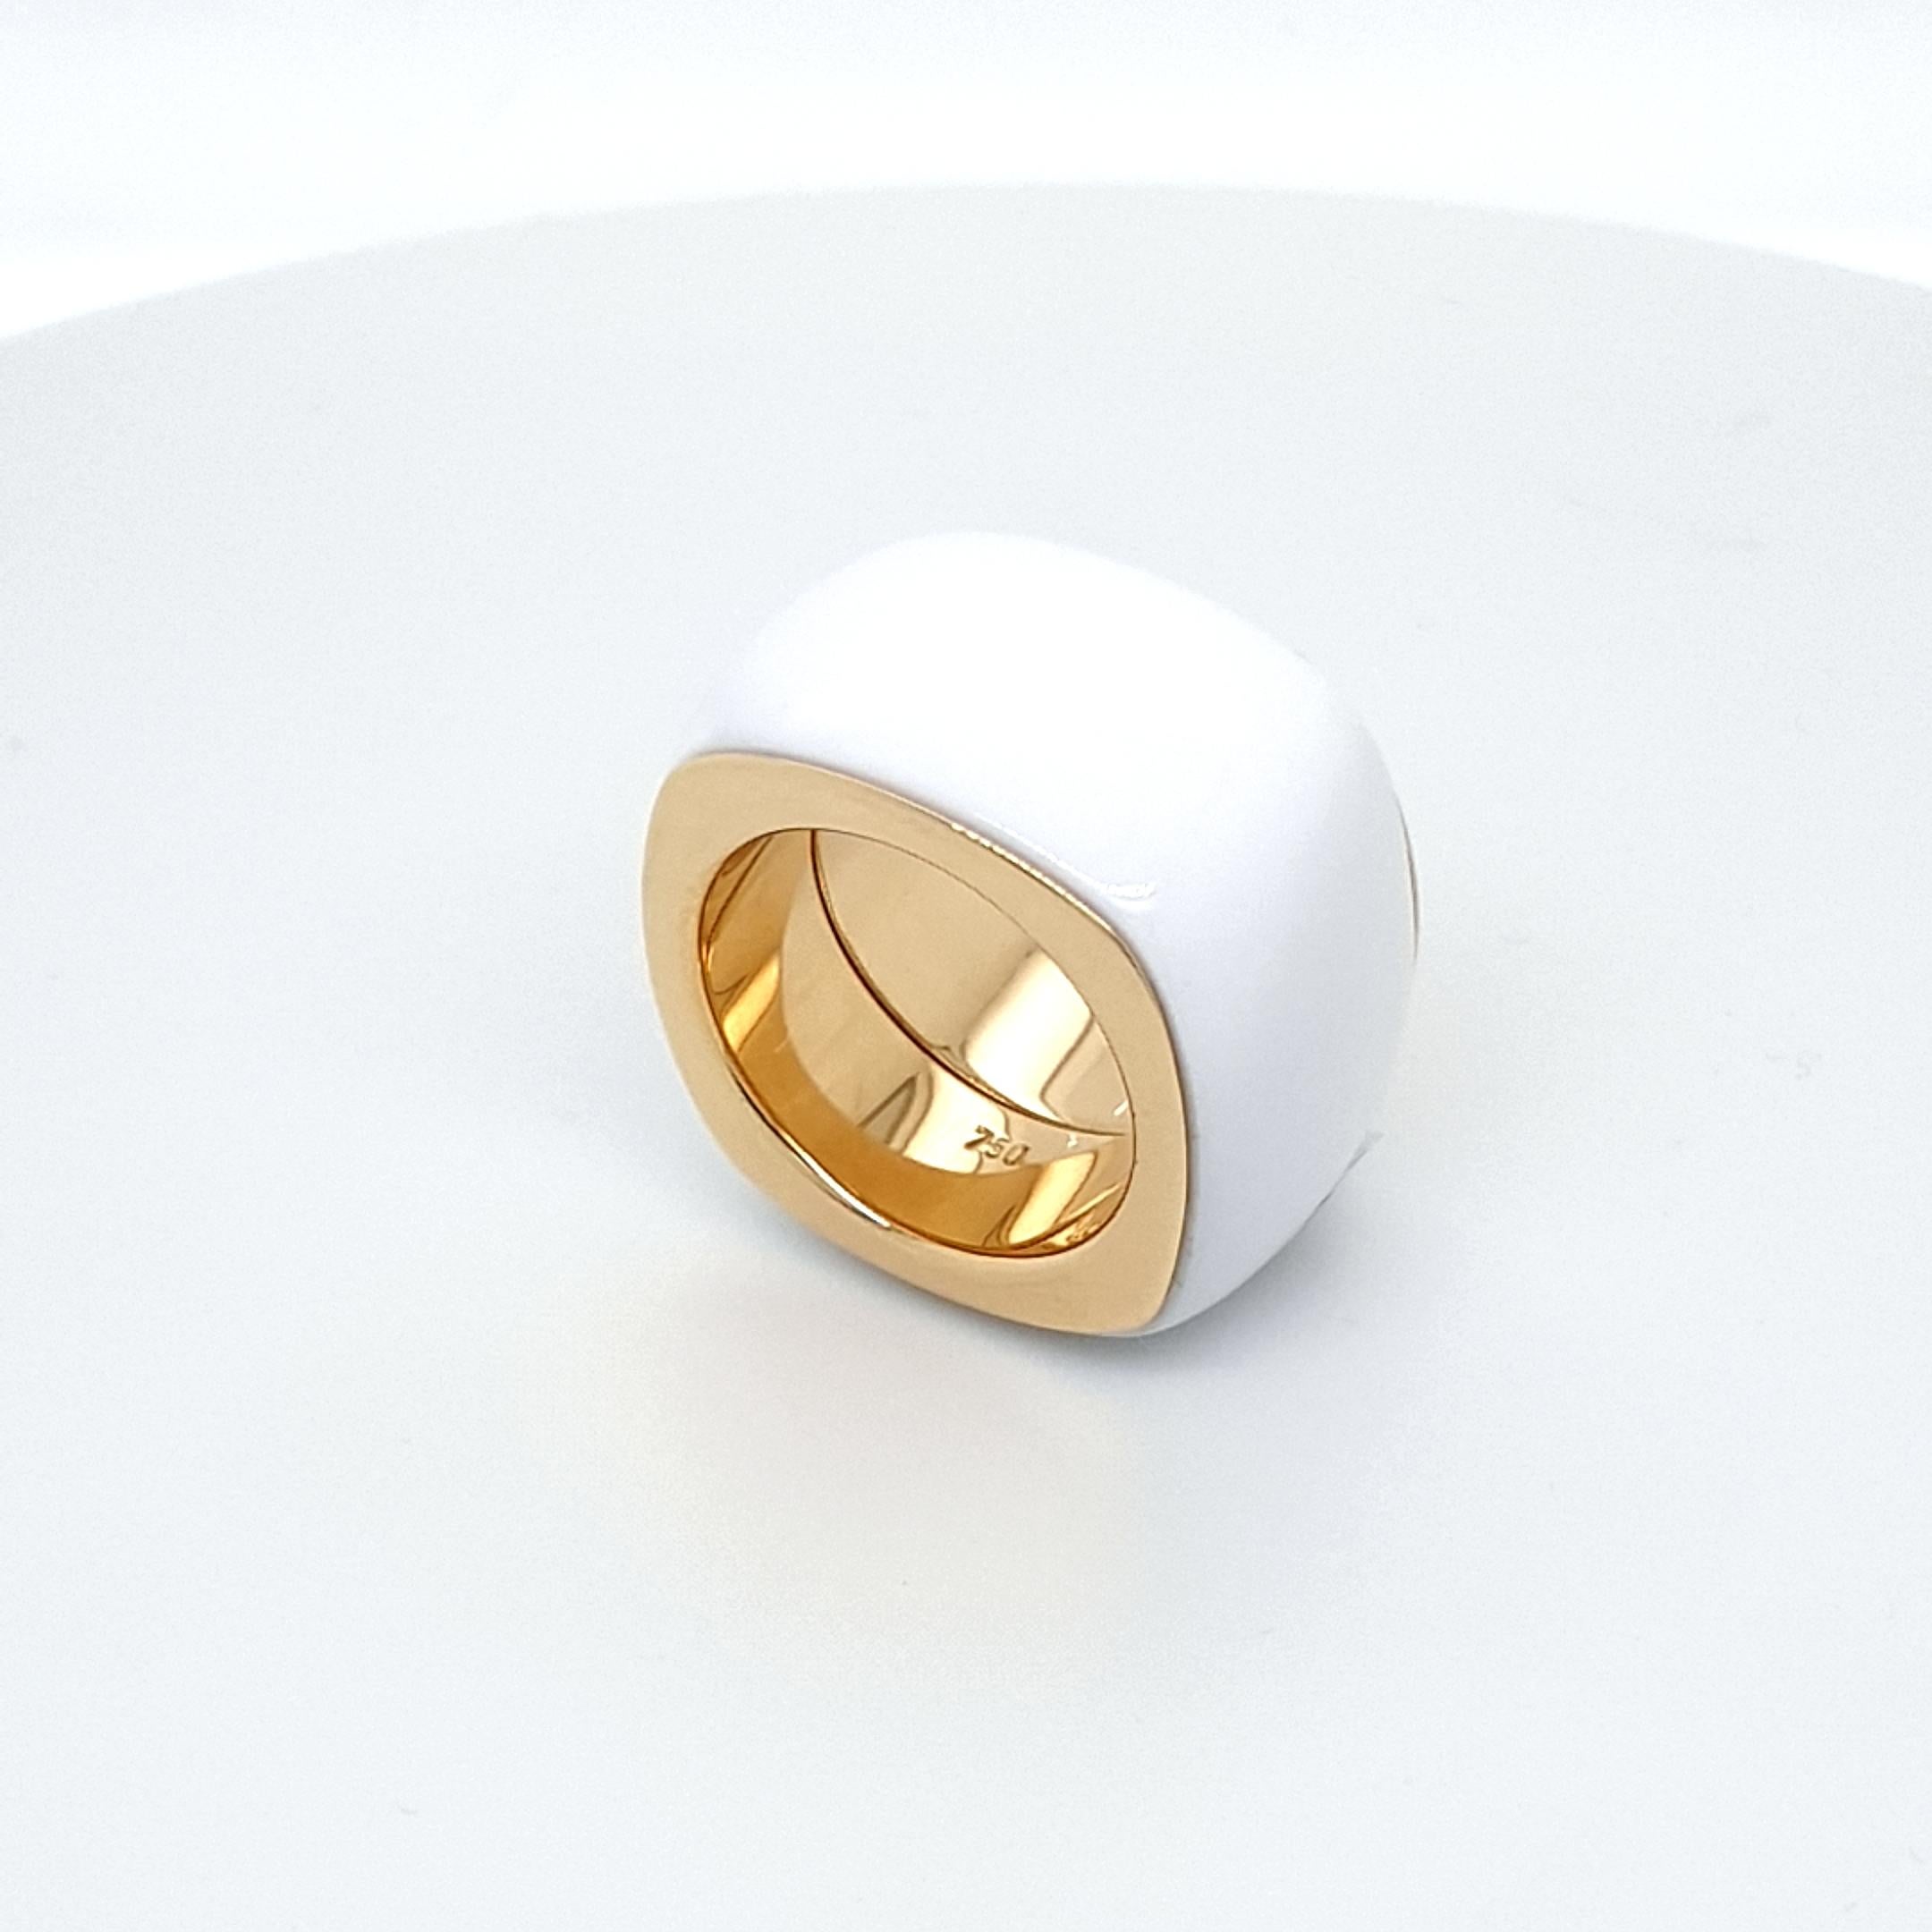 This Natural White Agate Ring with 18 Carat Yellow Gold is totally handmade.
Cutting as well as goldwork are made in German quality.
Finding a suitable nice Natural White Agate to cut a whole ring out of one piece is very difficult.
The cushion